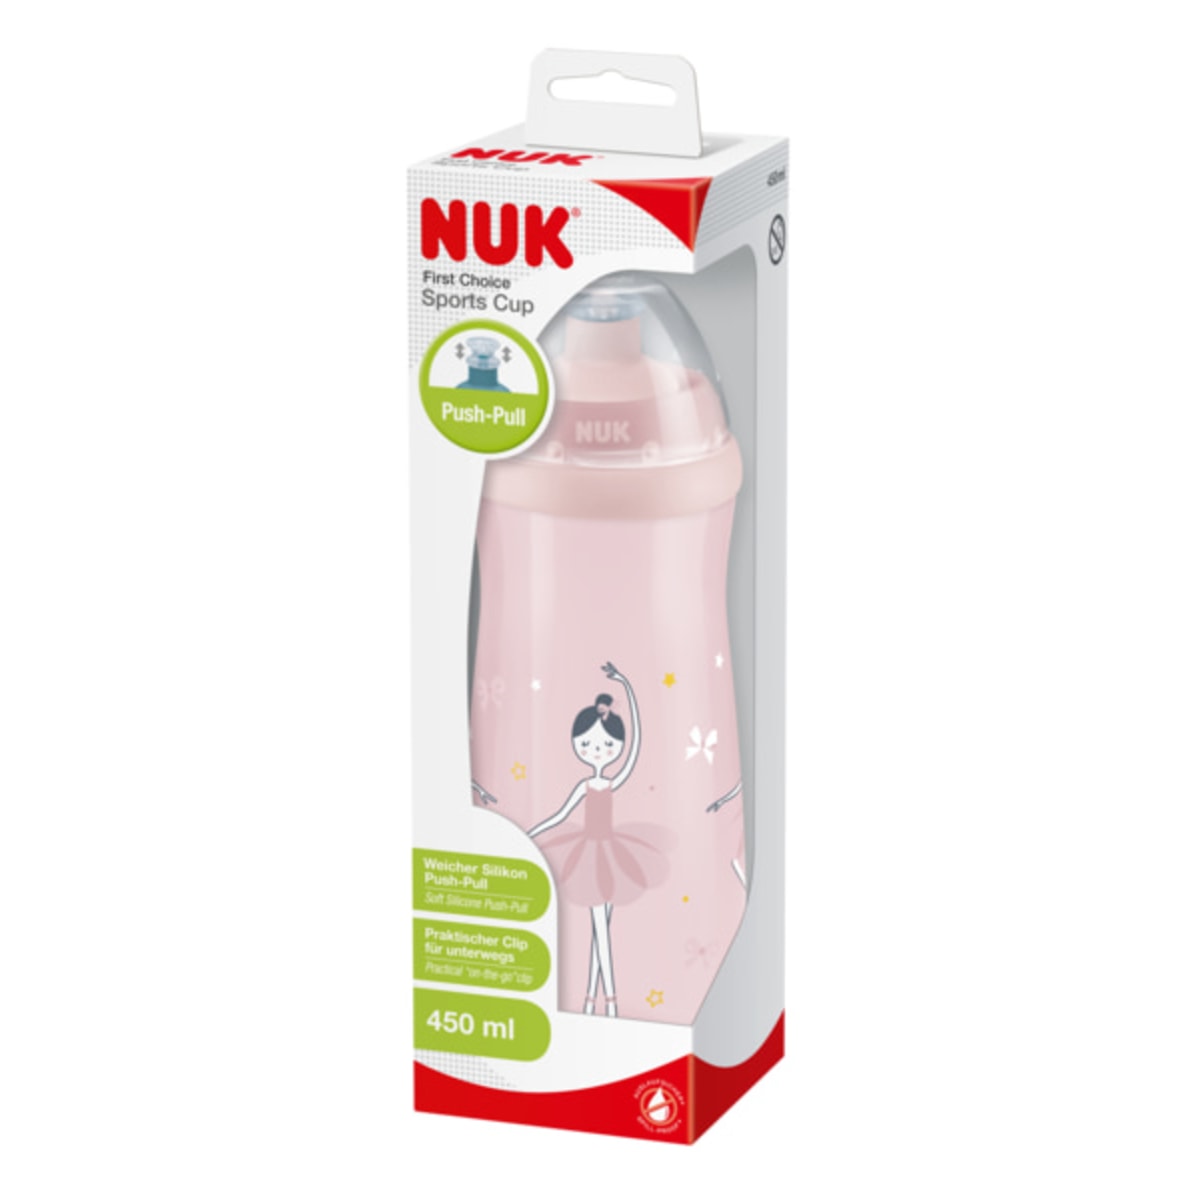 Nuk Sport Cup For 36 Months 450ml Online in Pakistan Lahore Karachi Islamabad